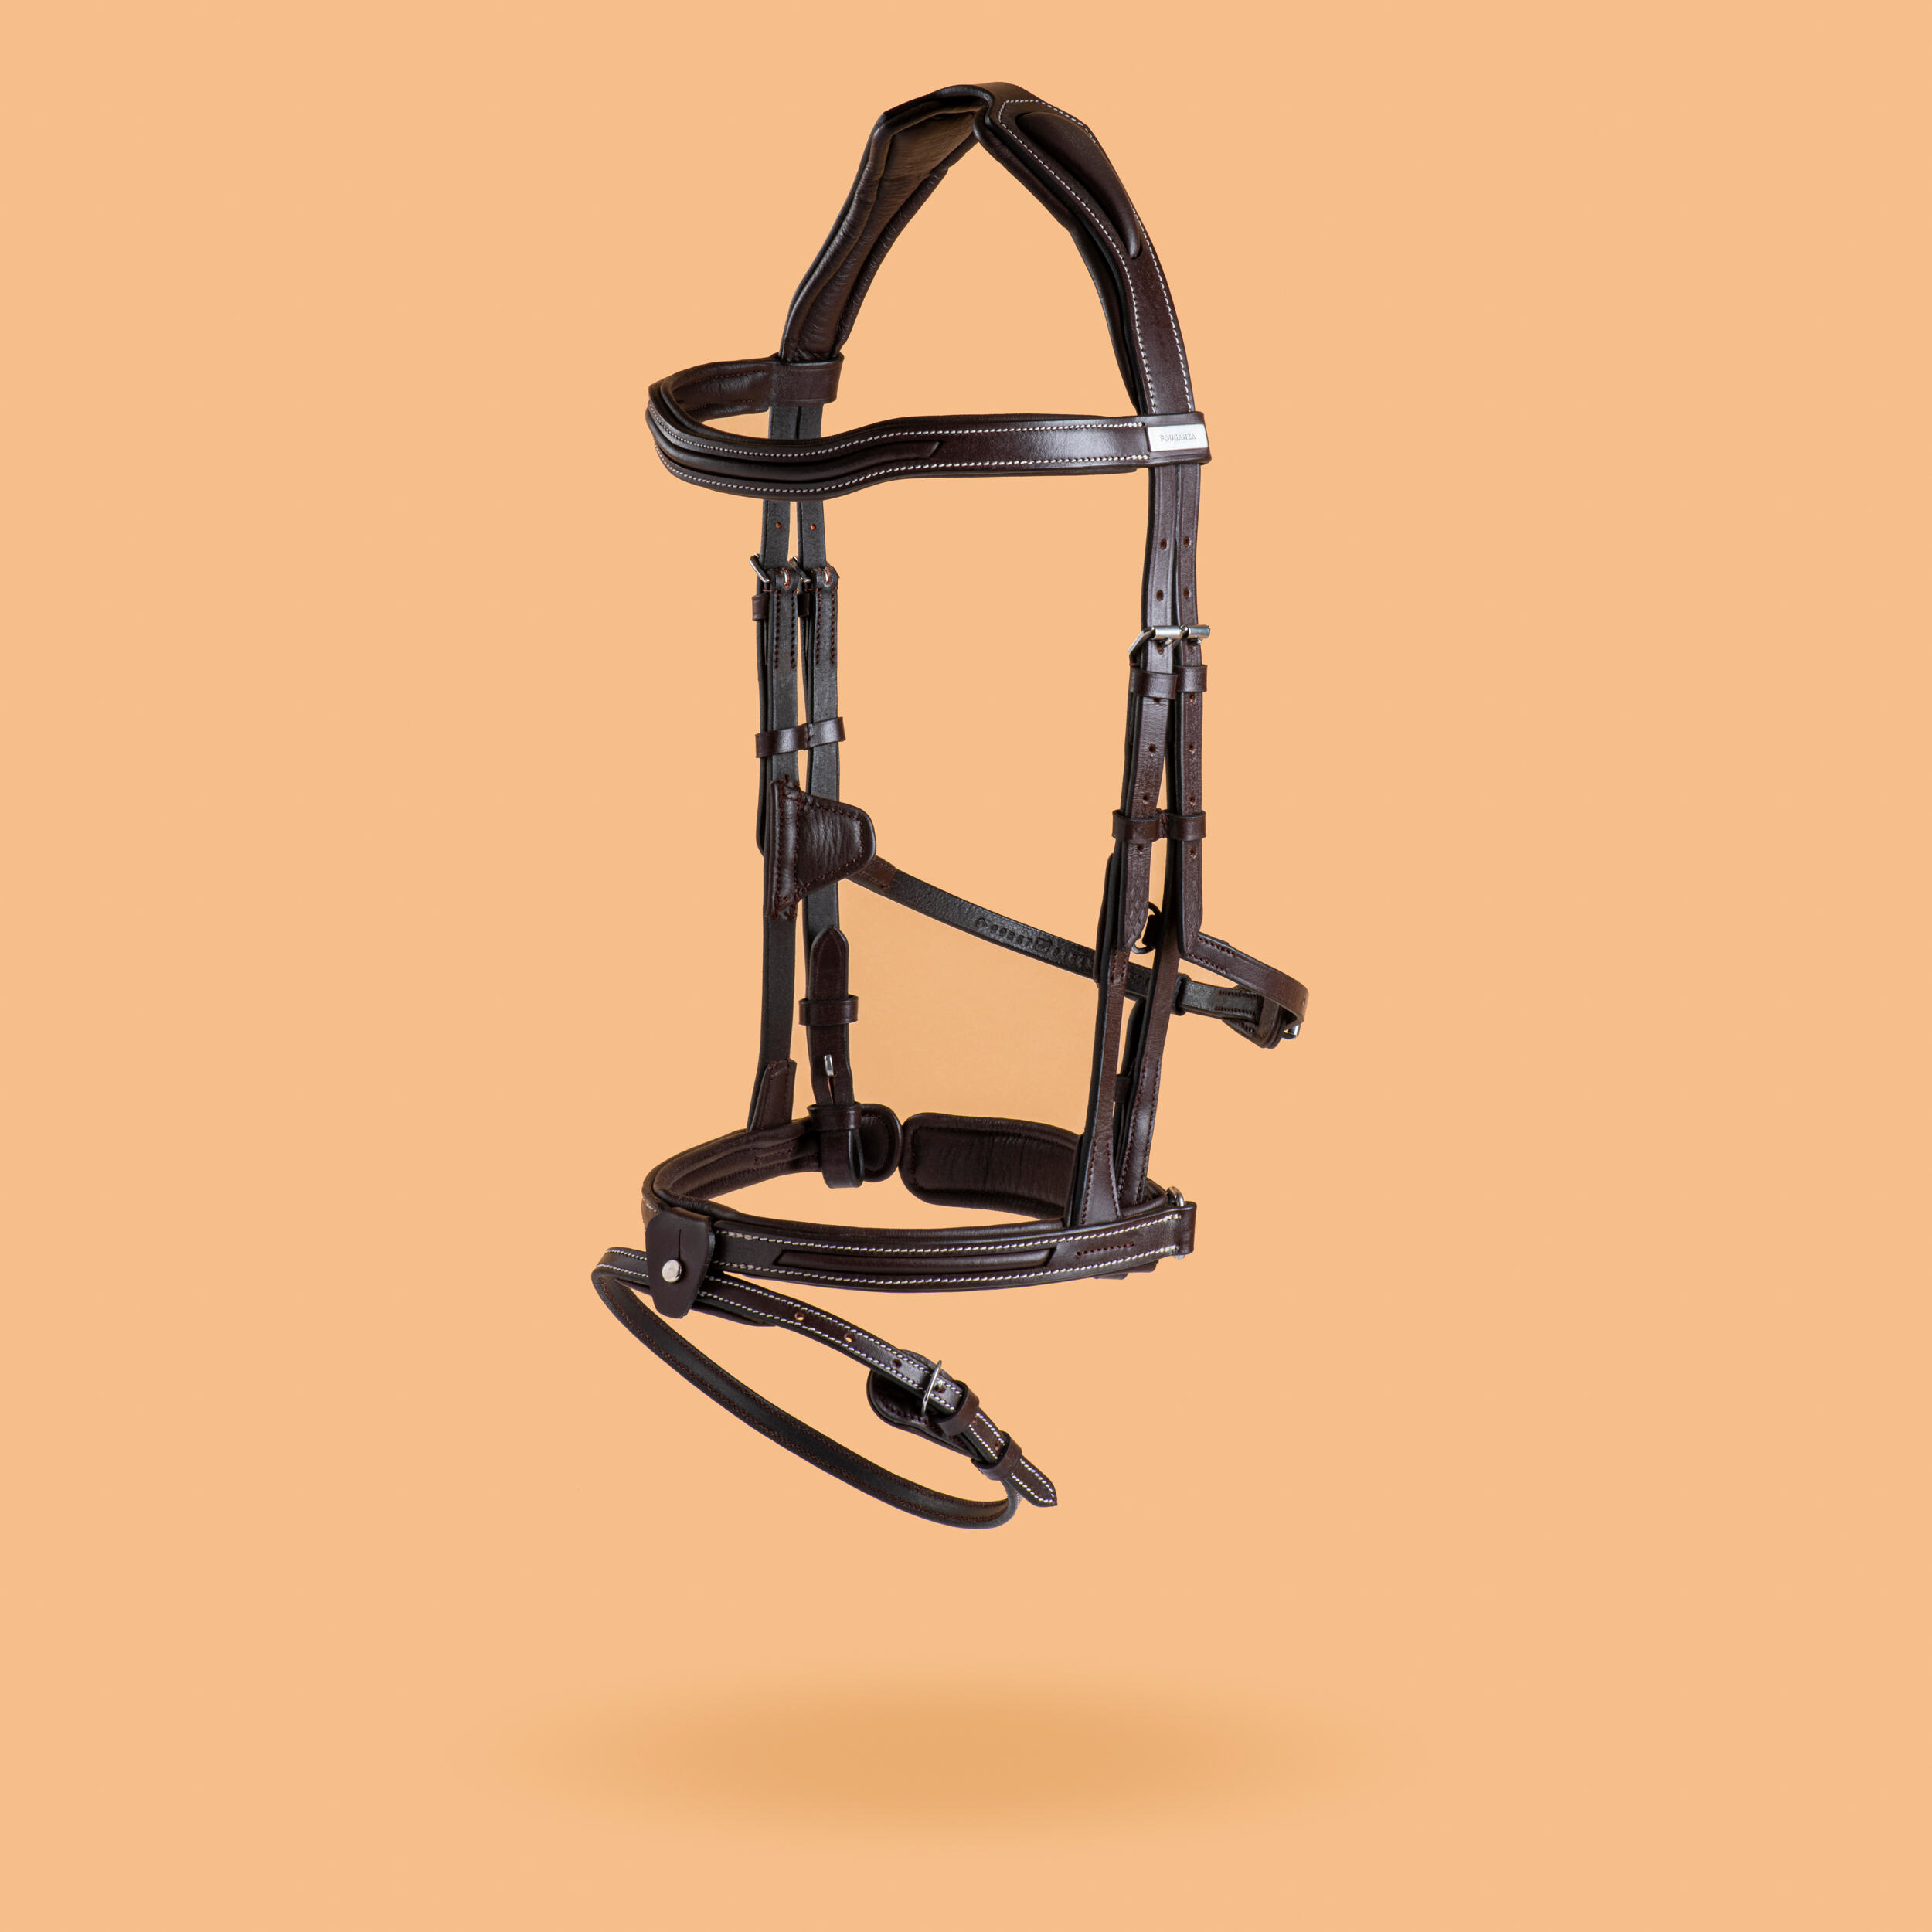 Horse & Pony Leather Bridle With French Noseband 900 - Dark Brown/Black 1/5